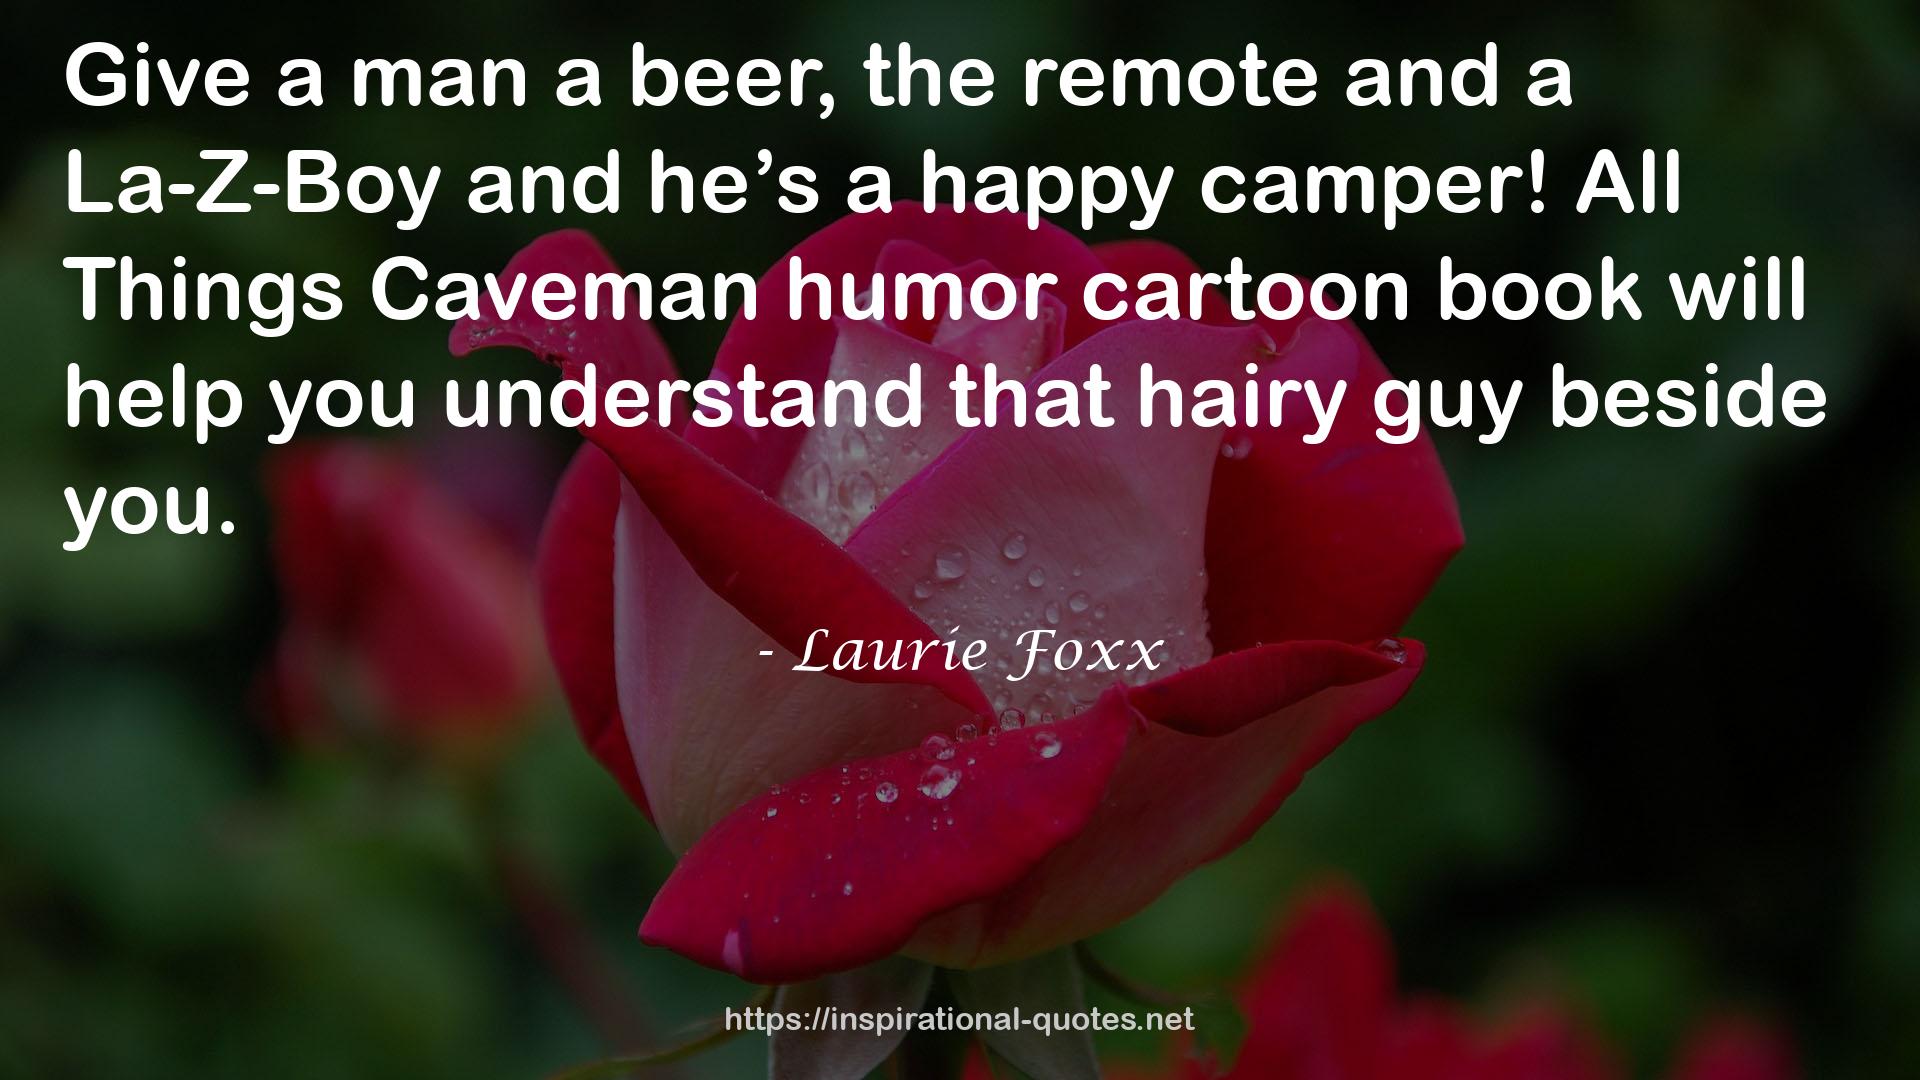 Laurie Foxx QUOTES